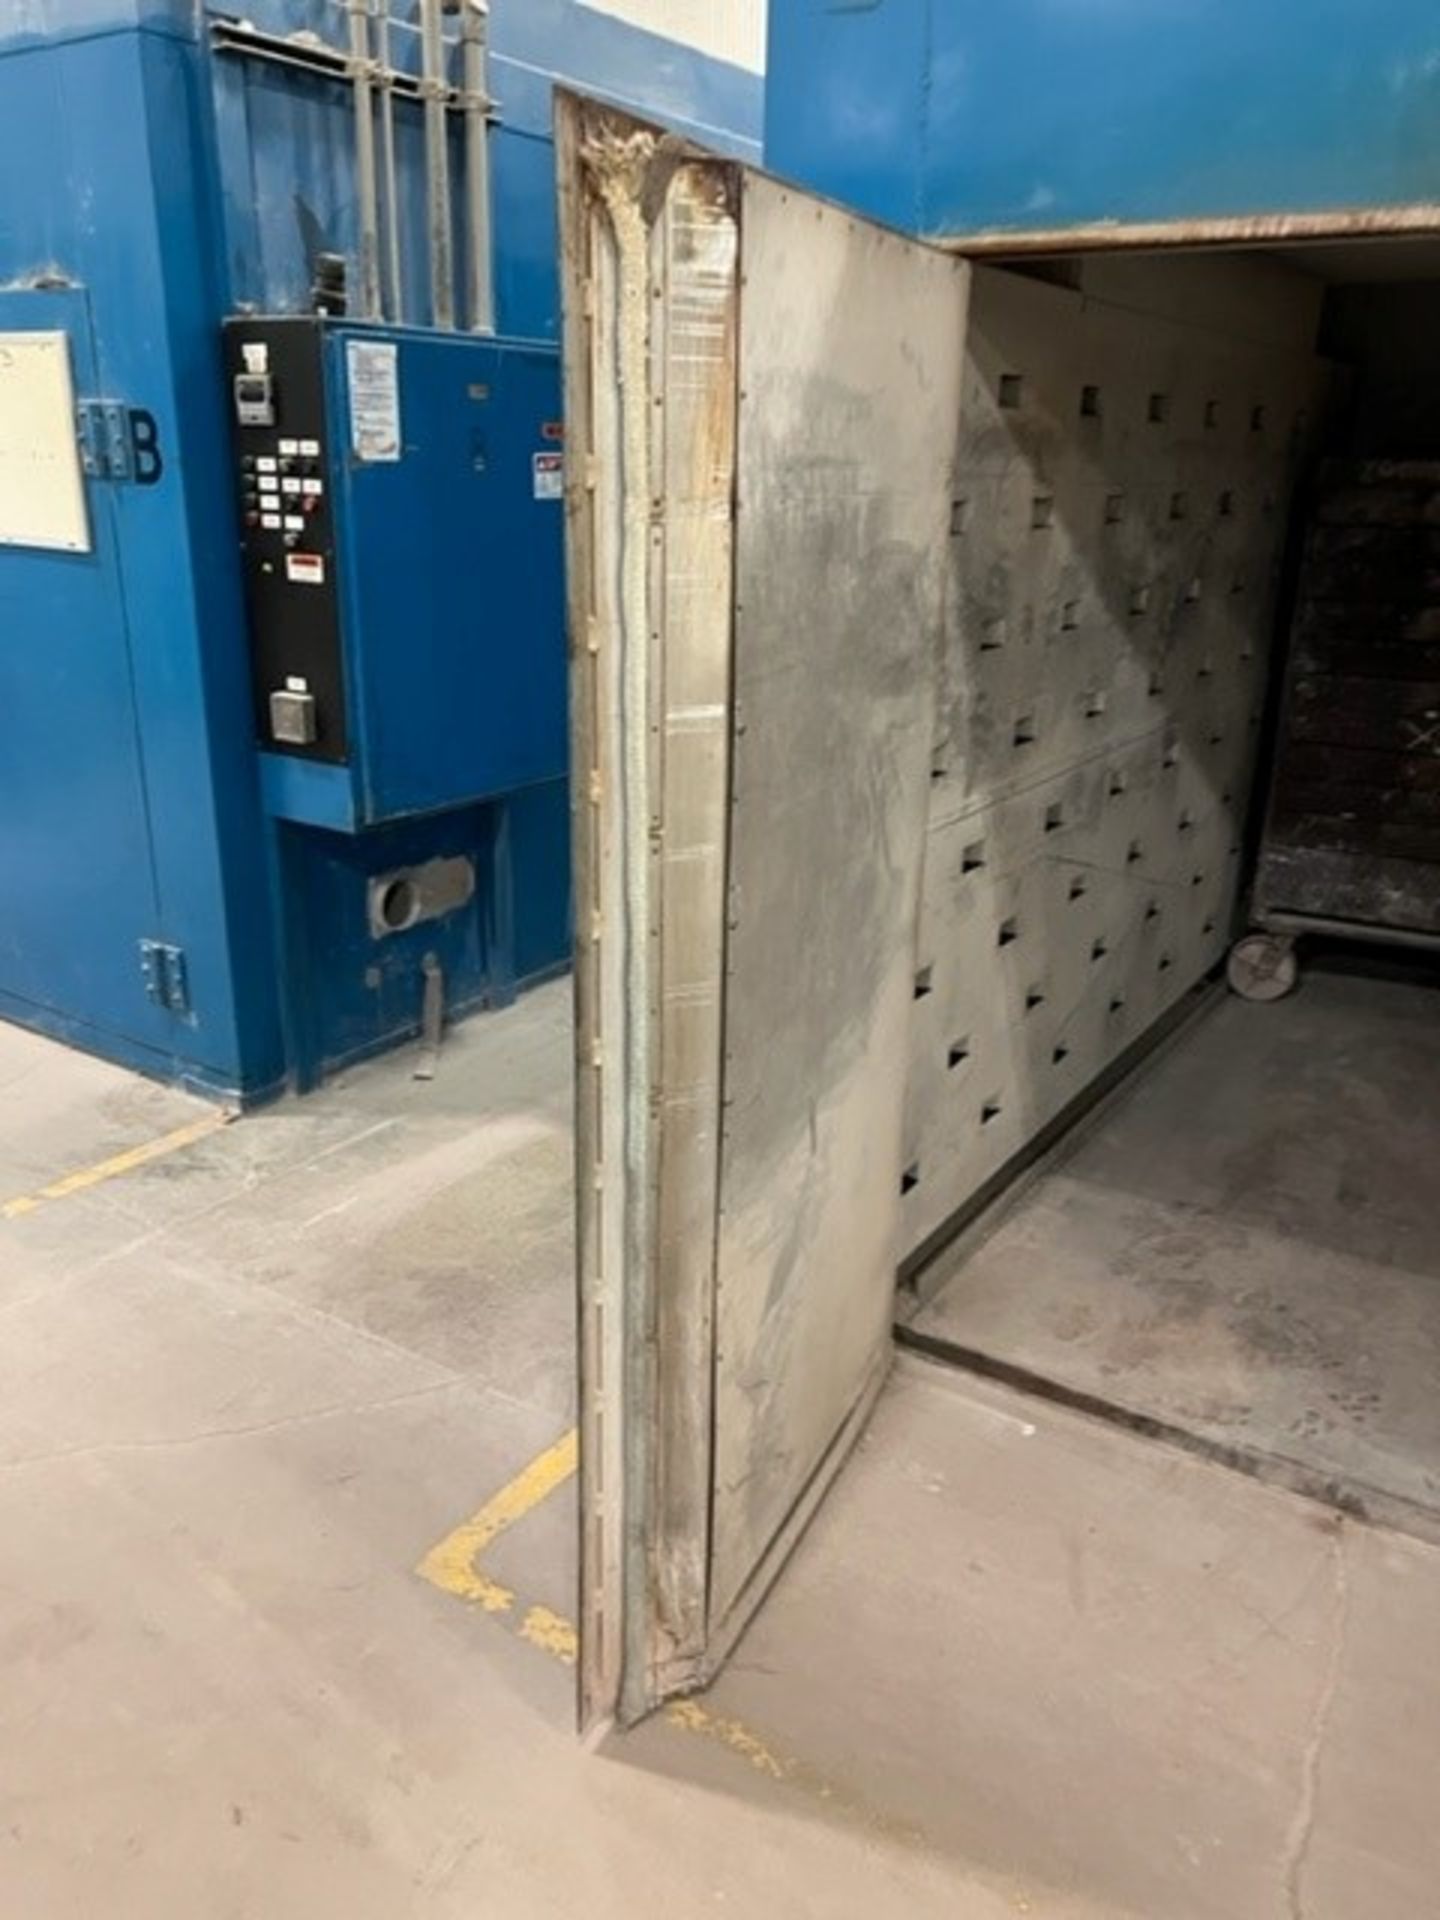 6' X 10' X 6' WISCONSIN OVEN MODEL SWN-610-6E ELECTRIC BATCH OVEN; S/N 112600805, 500 DEGREE, - Image 14 of 14